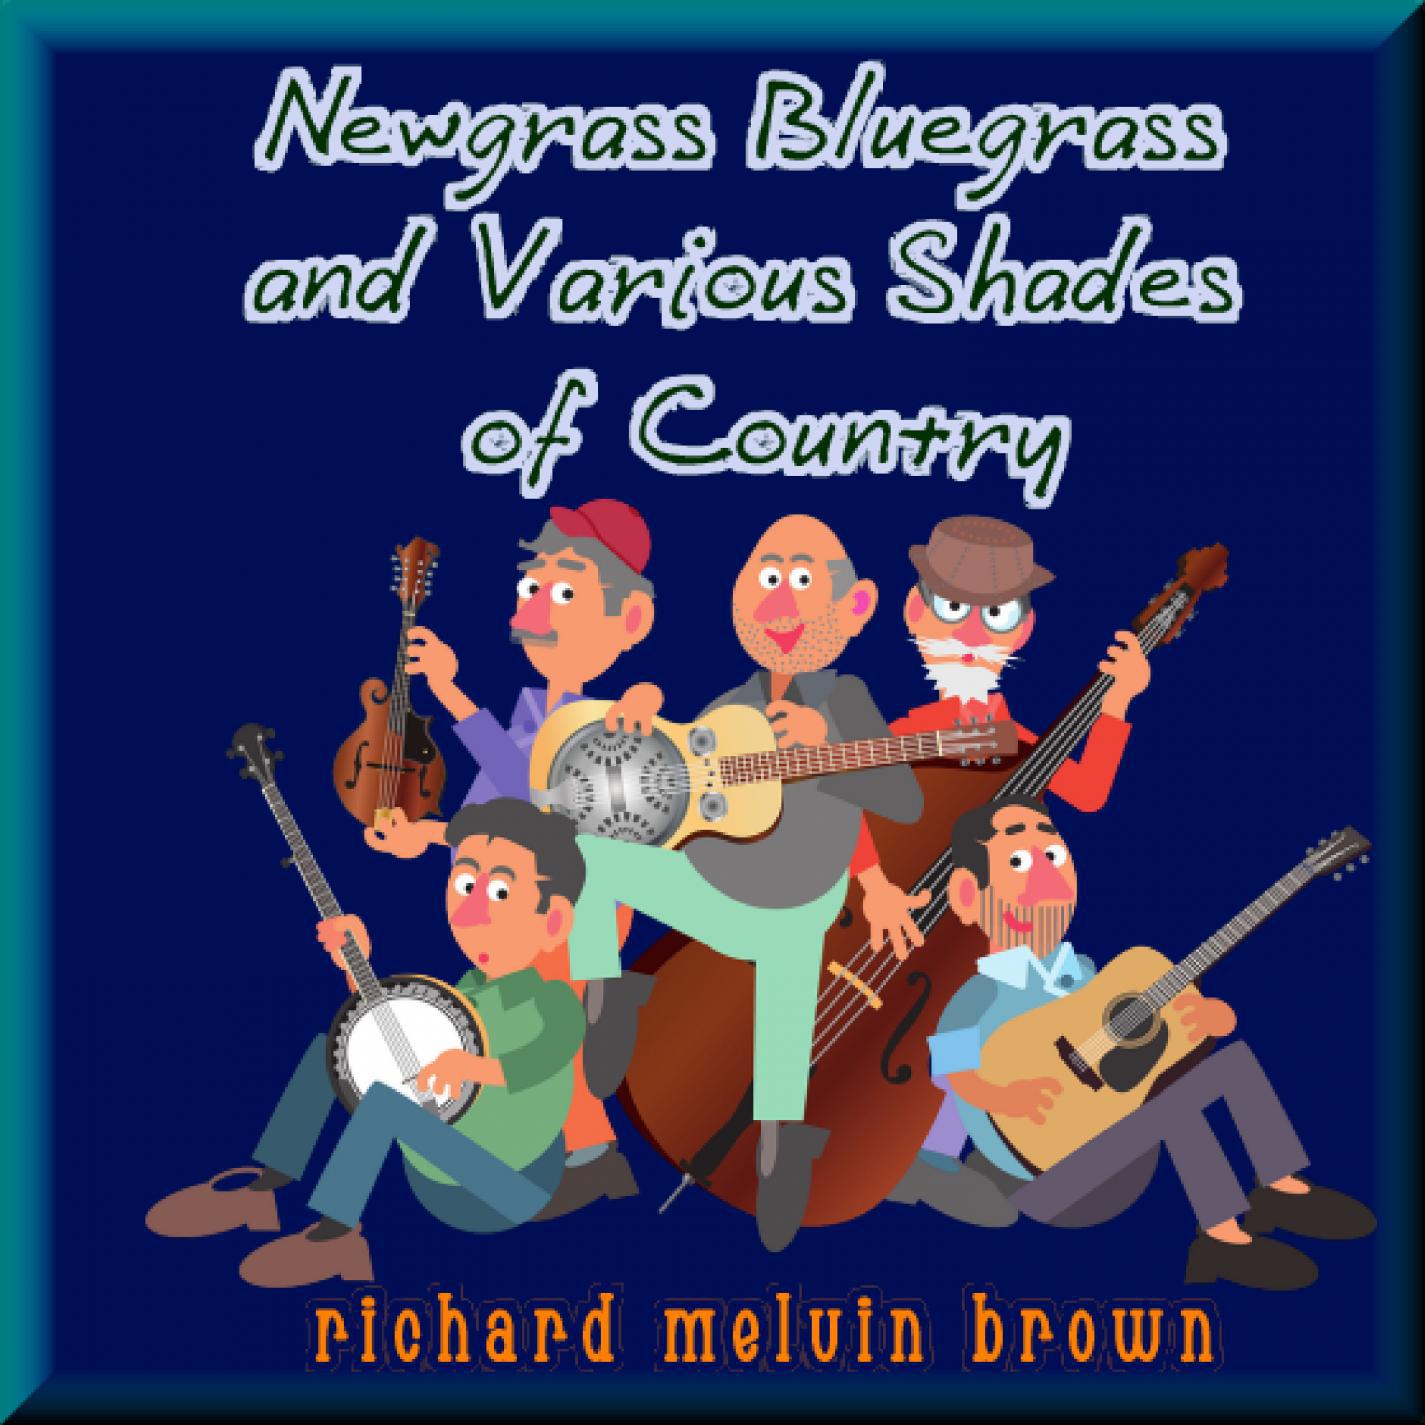 Newgrass Bluegrass and Various Shades of Country